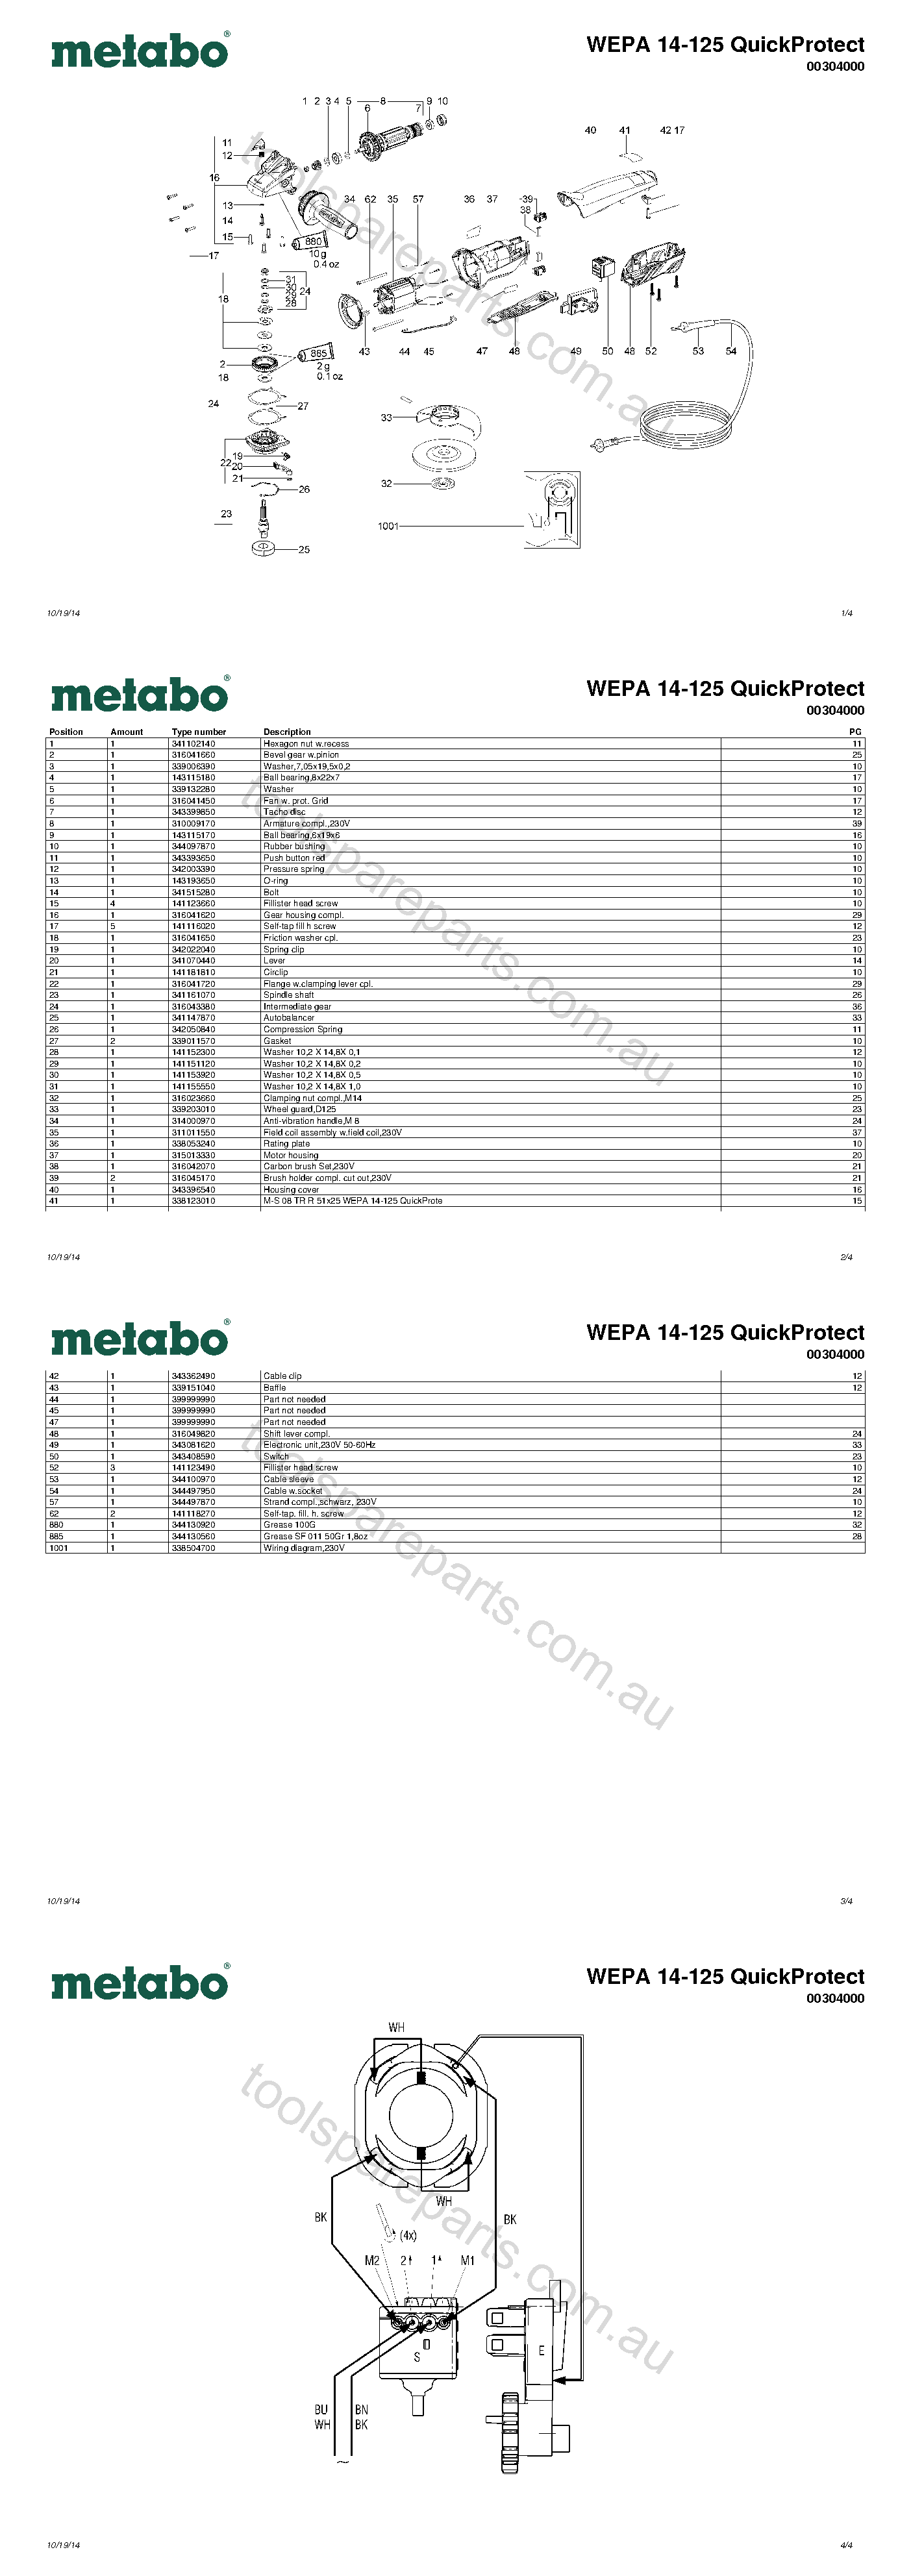 Metabo WEPA 14-125 QuickProtect 00304000  Diagram 1